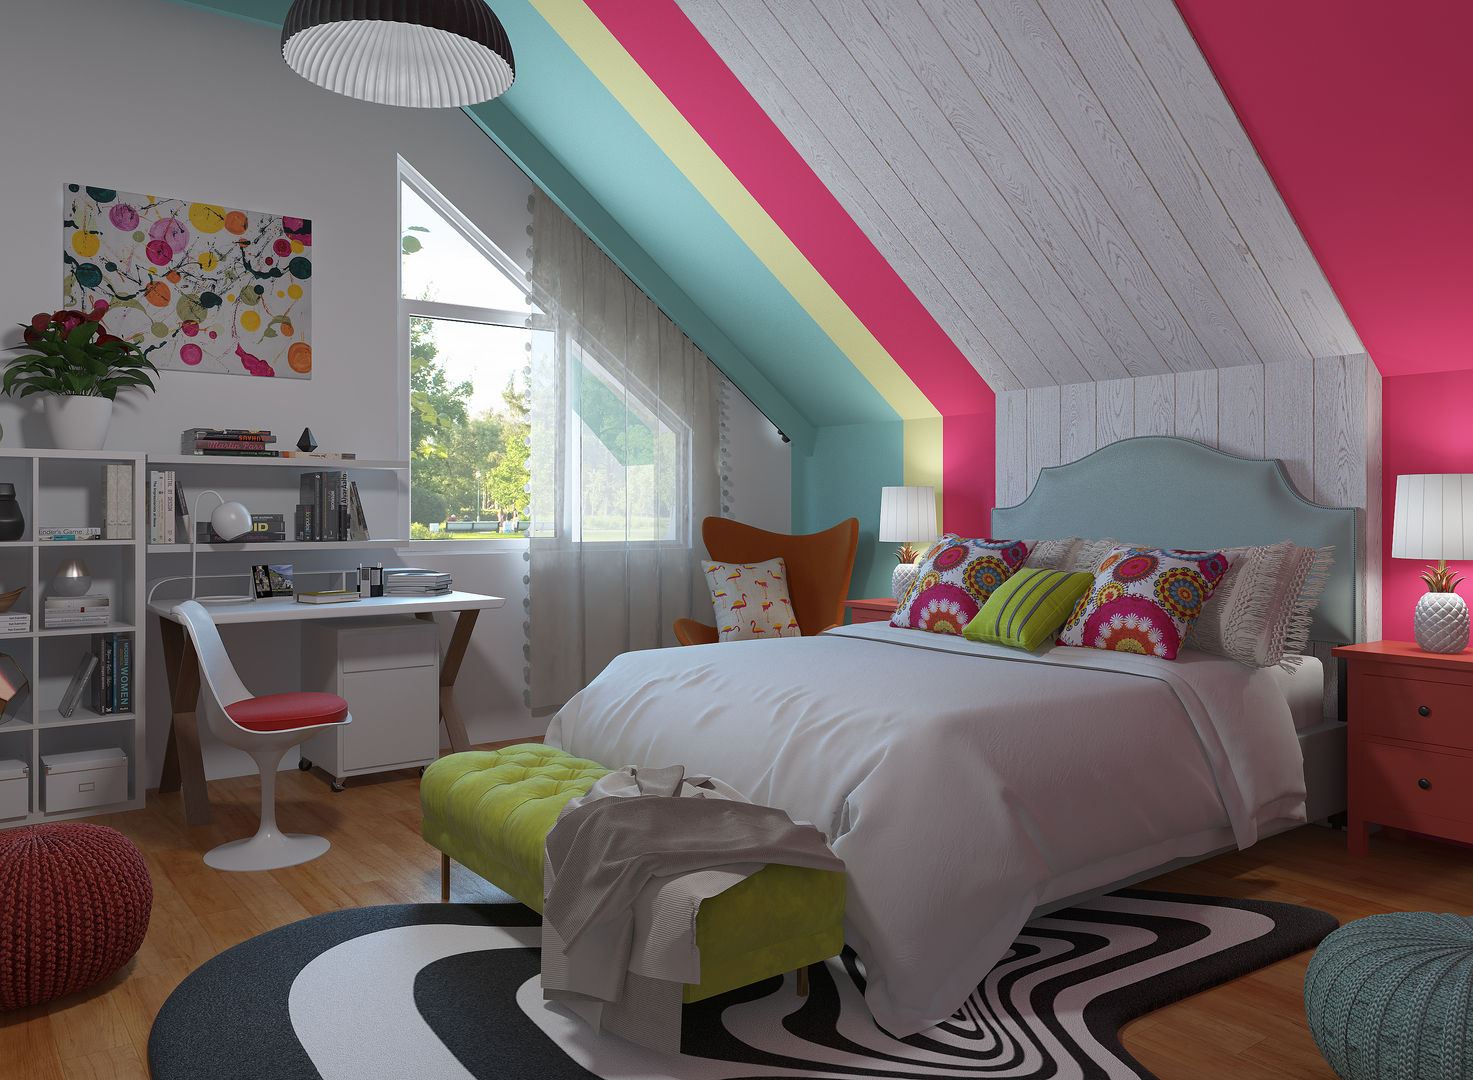 Eclectic -Pop Art decoration homify غرفة نوم bedroom,decorate bedroom,how to decorate,pop art style,pop art bedroom,3d design,interior design,rendering,home deco,colourful,customized designs